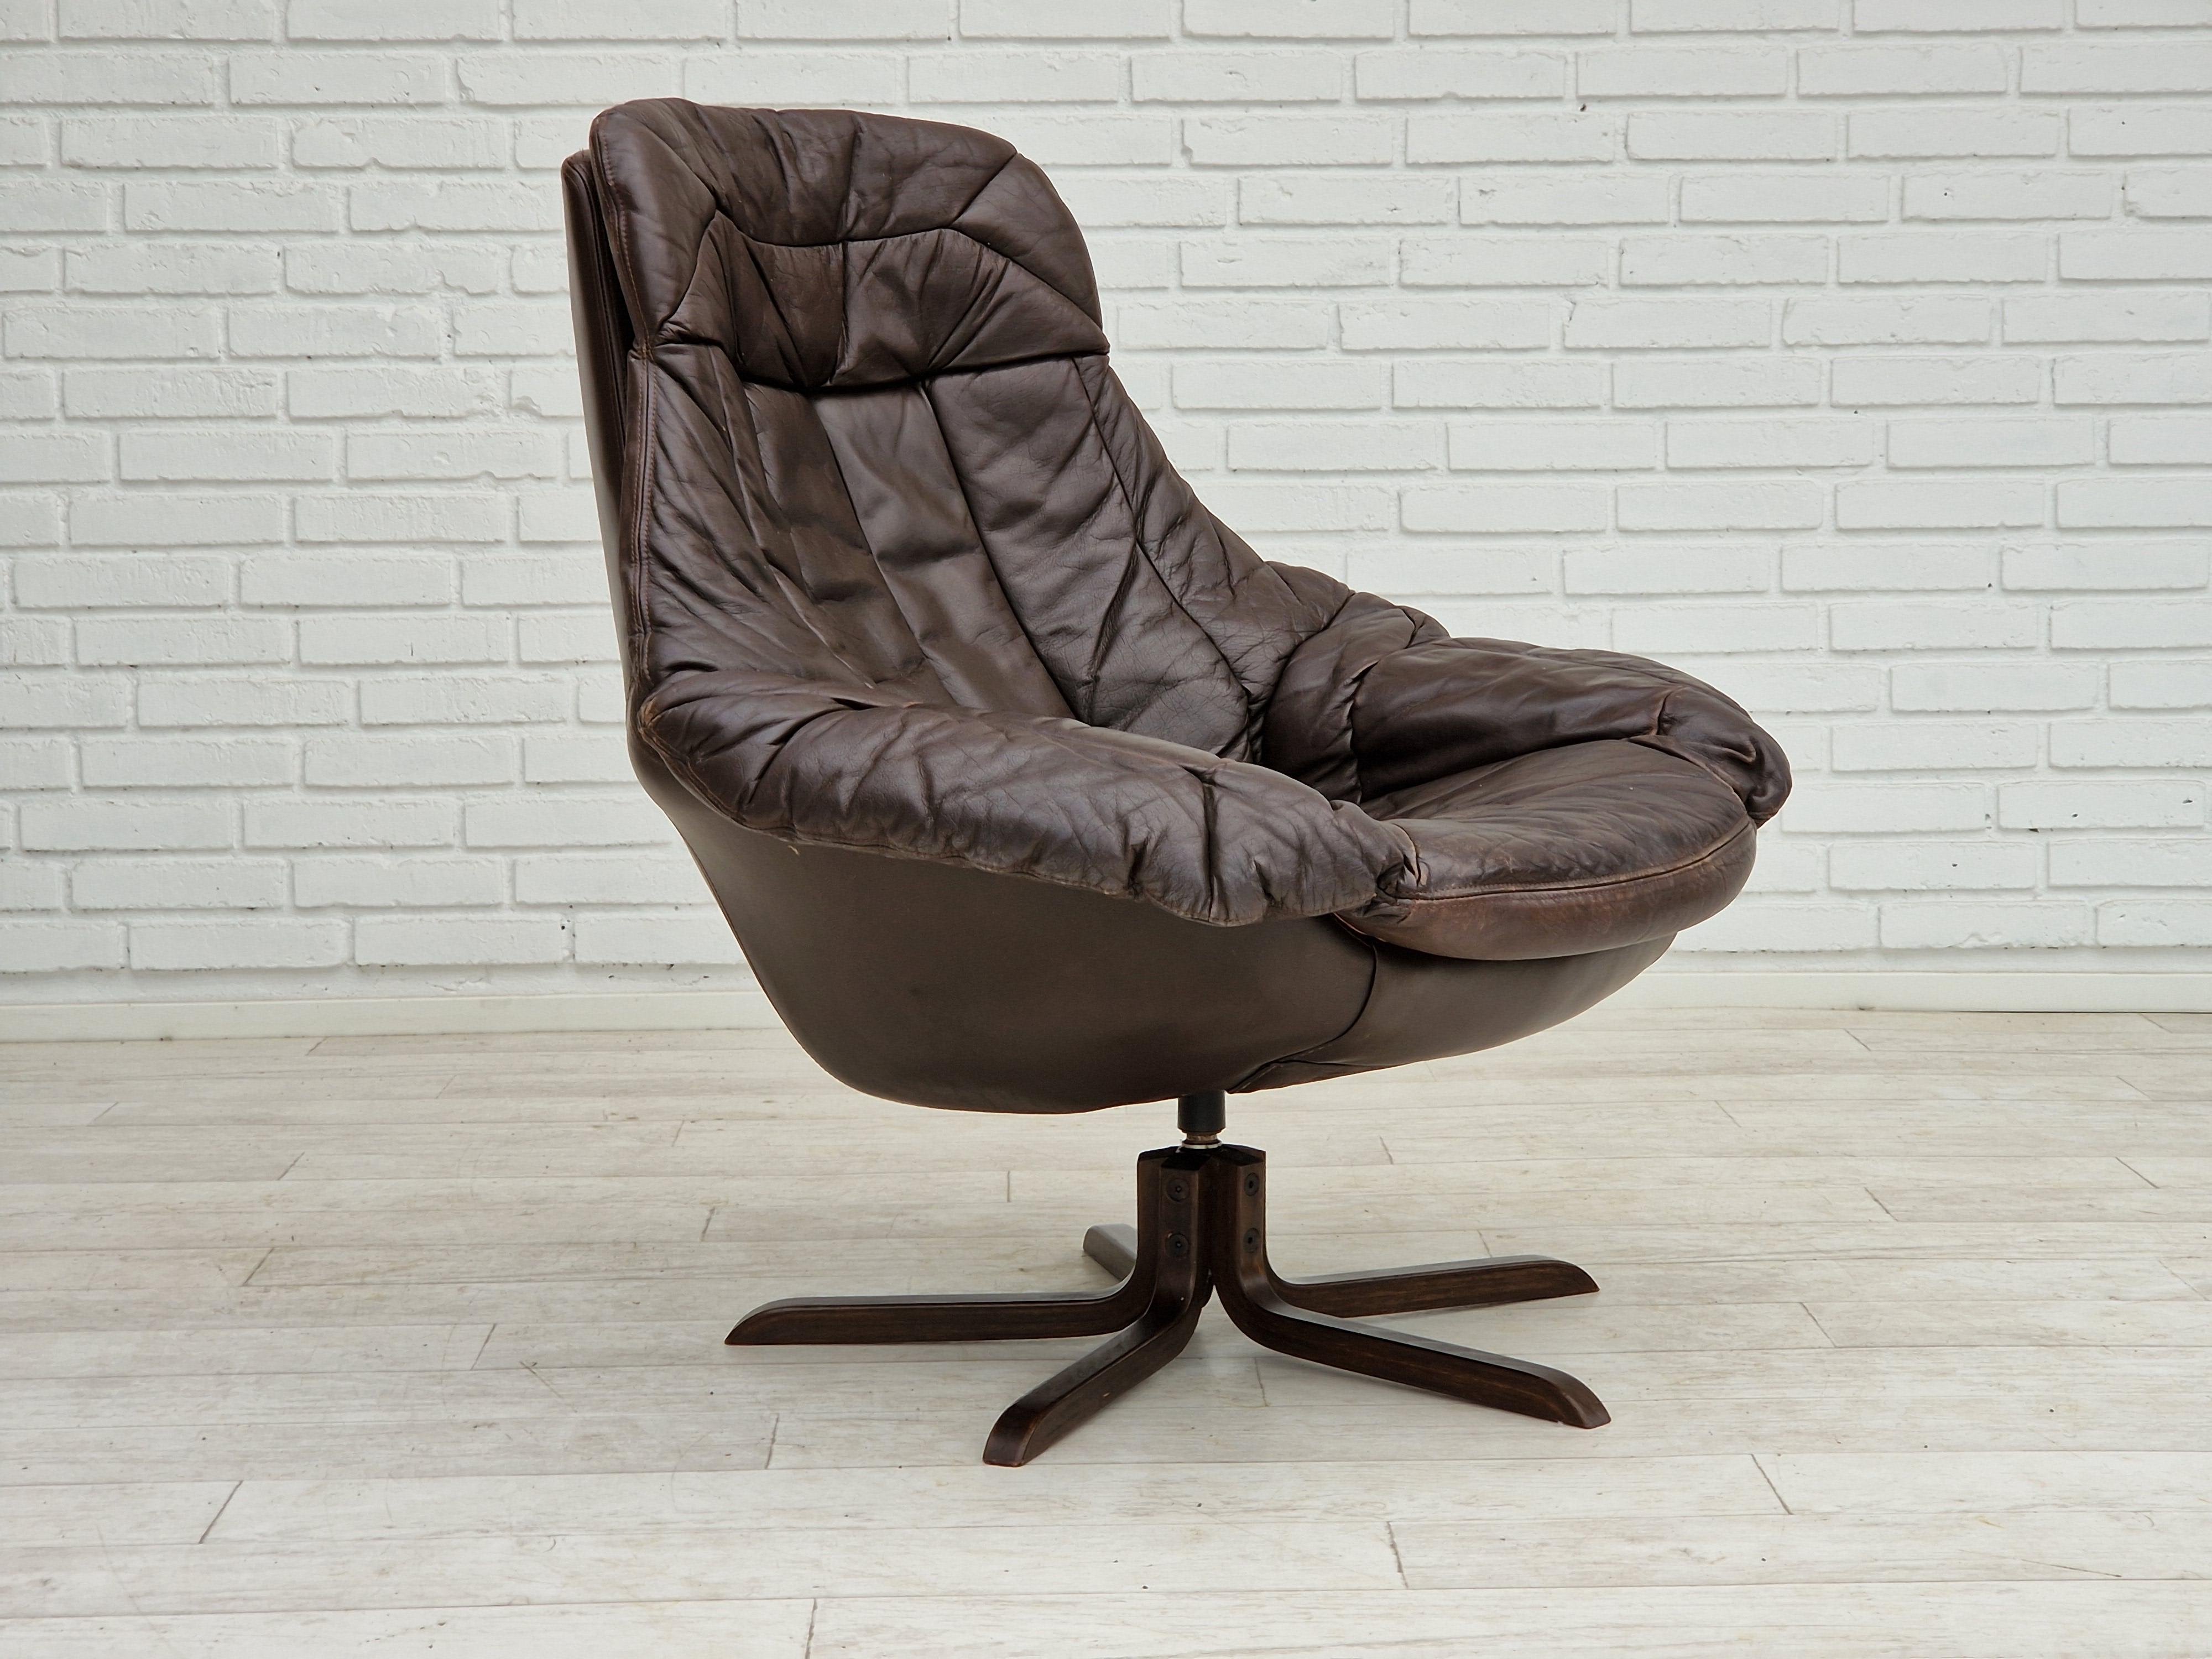 1970s, Danish design by Henry Walter Klein, armchair model Silhouette. Original good condition: no smells and no stains. The chair doesn't rotate, permanently installed. Manufactured by Danish furniture manufacturer Bramin Møbler in about 1970.